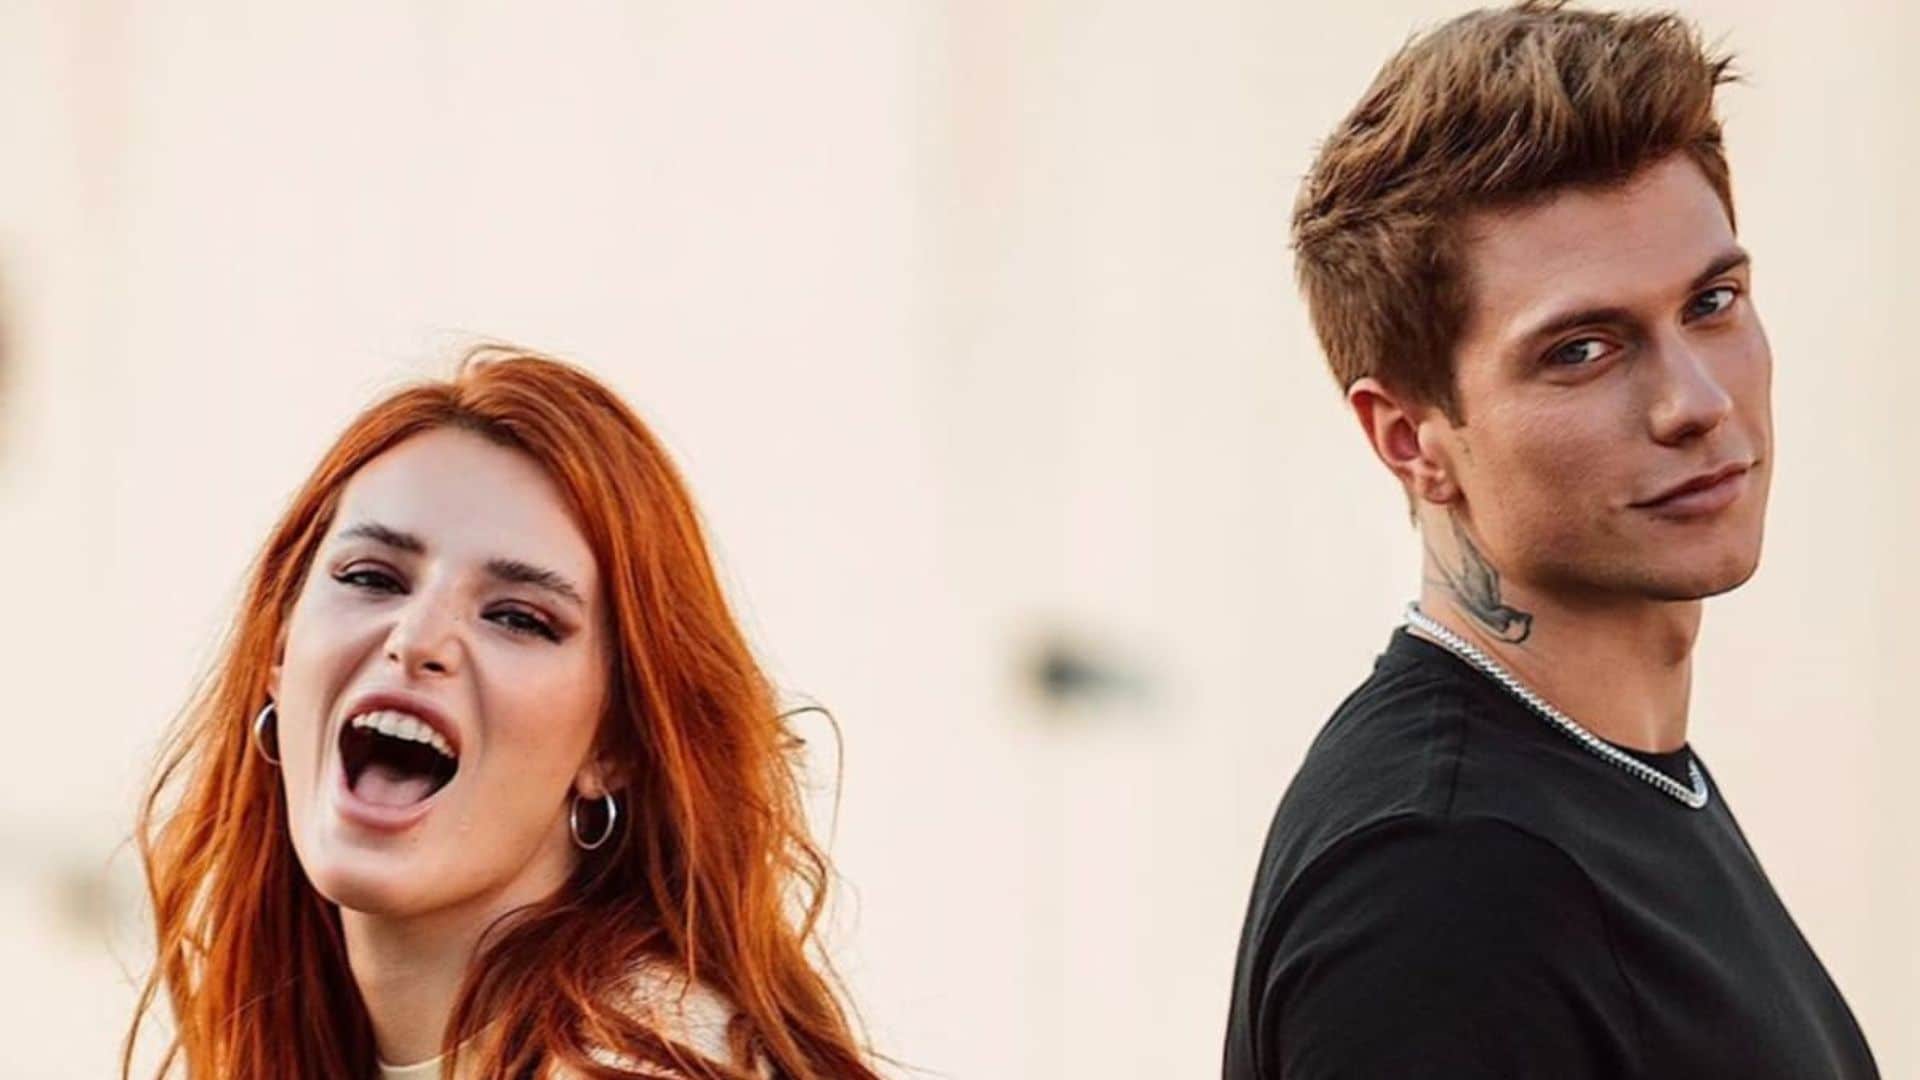 Bella Thorne and fiancé Benjamin Mascolo are starring in a new film together